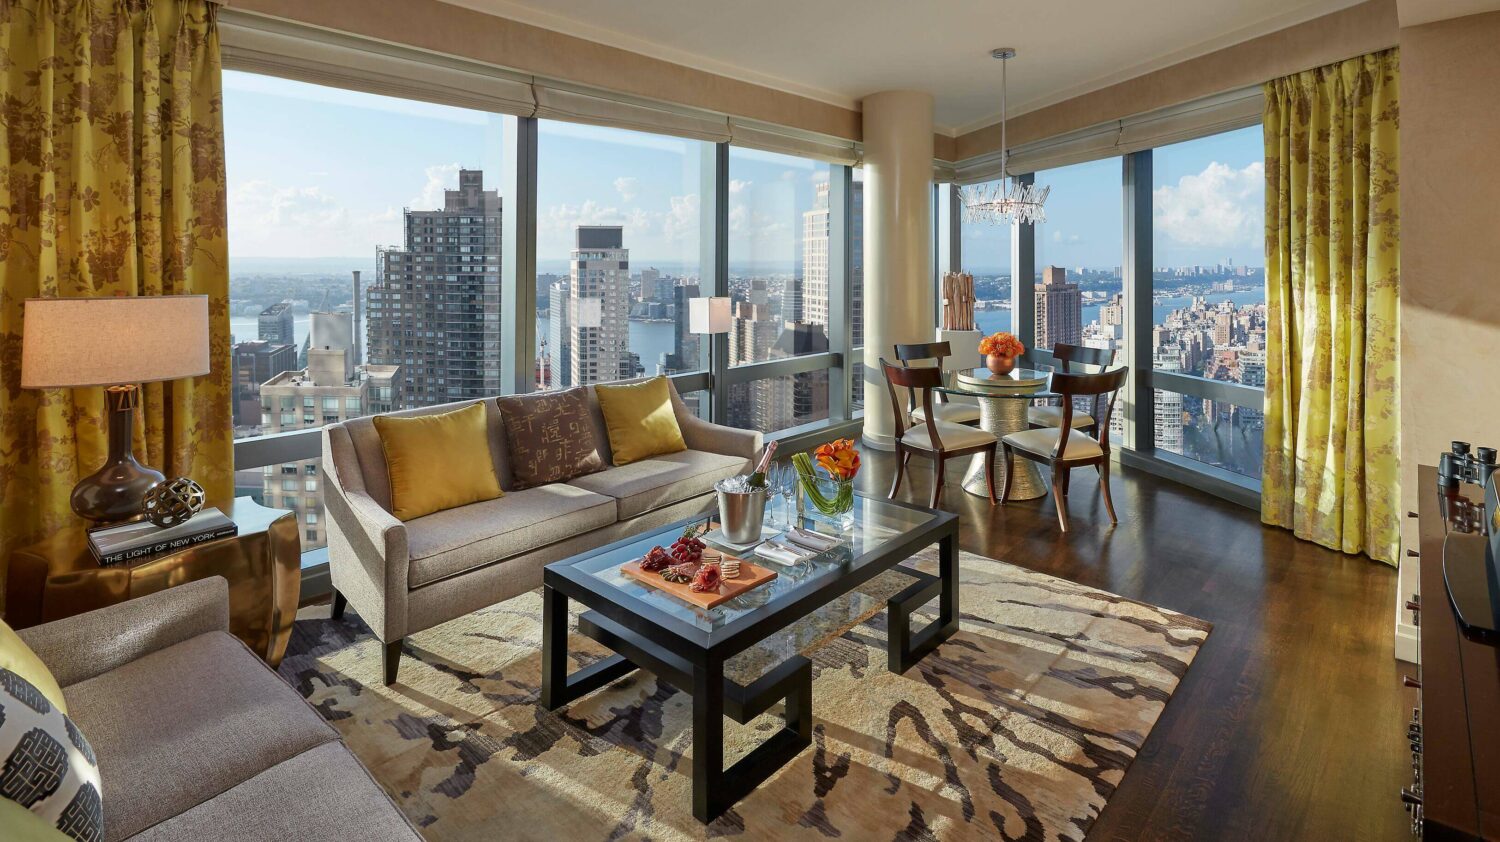 Most Romantic Hotels In Nyc With A View Visit Perfect Bersamawisata